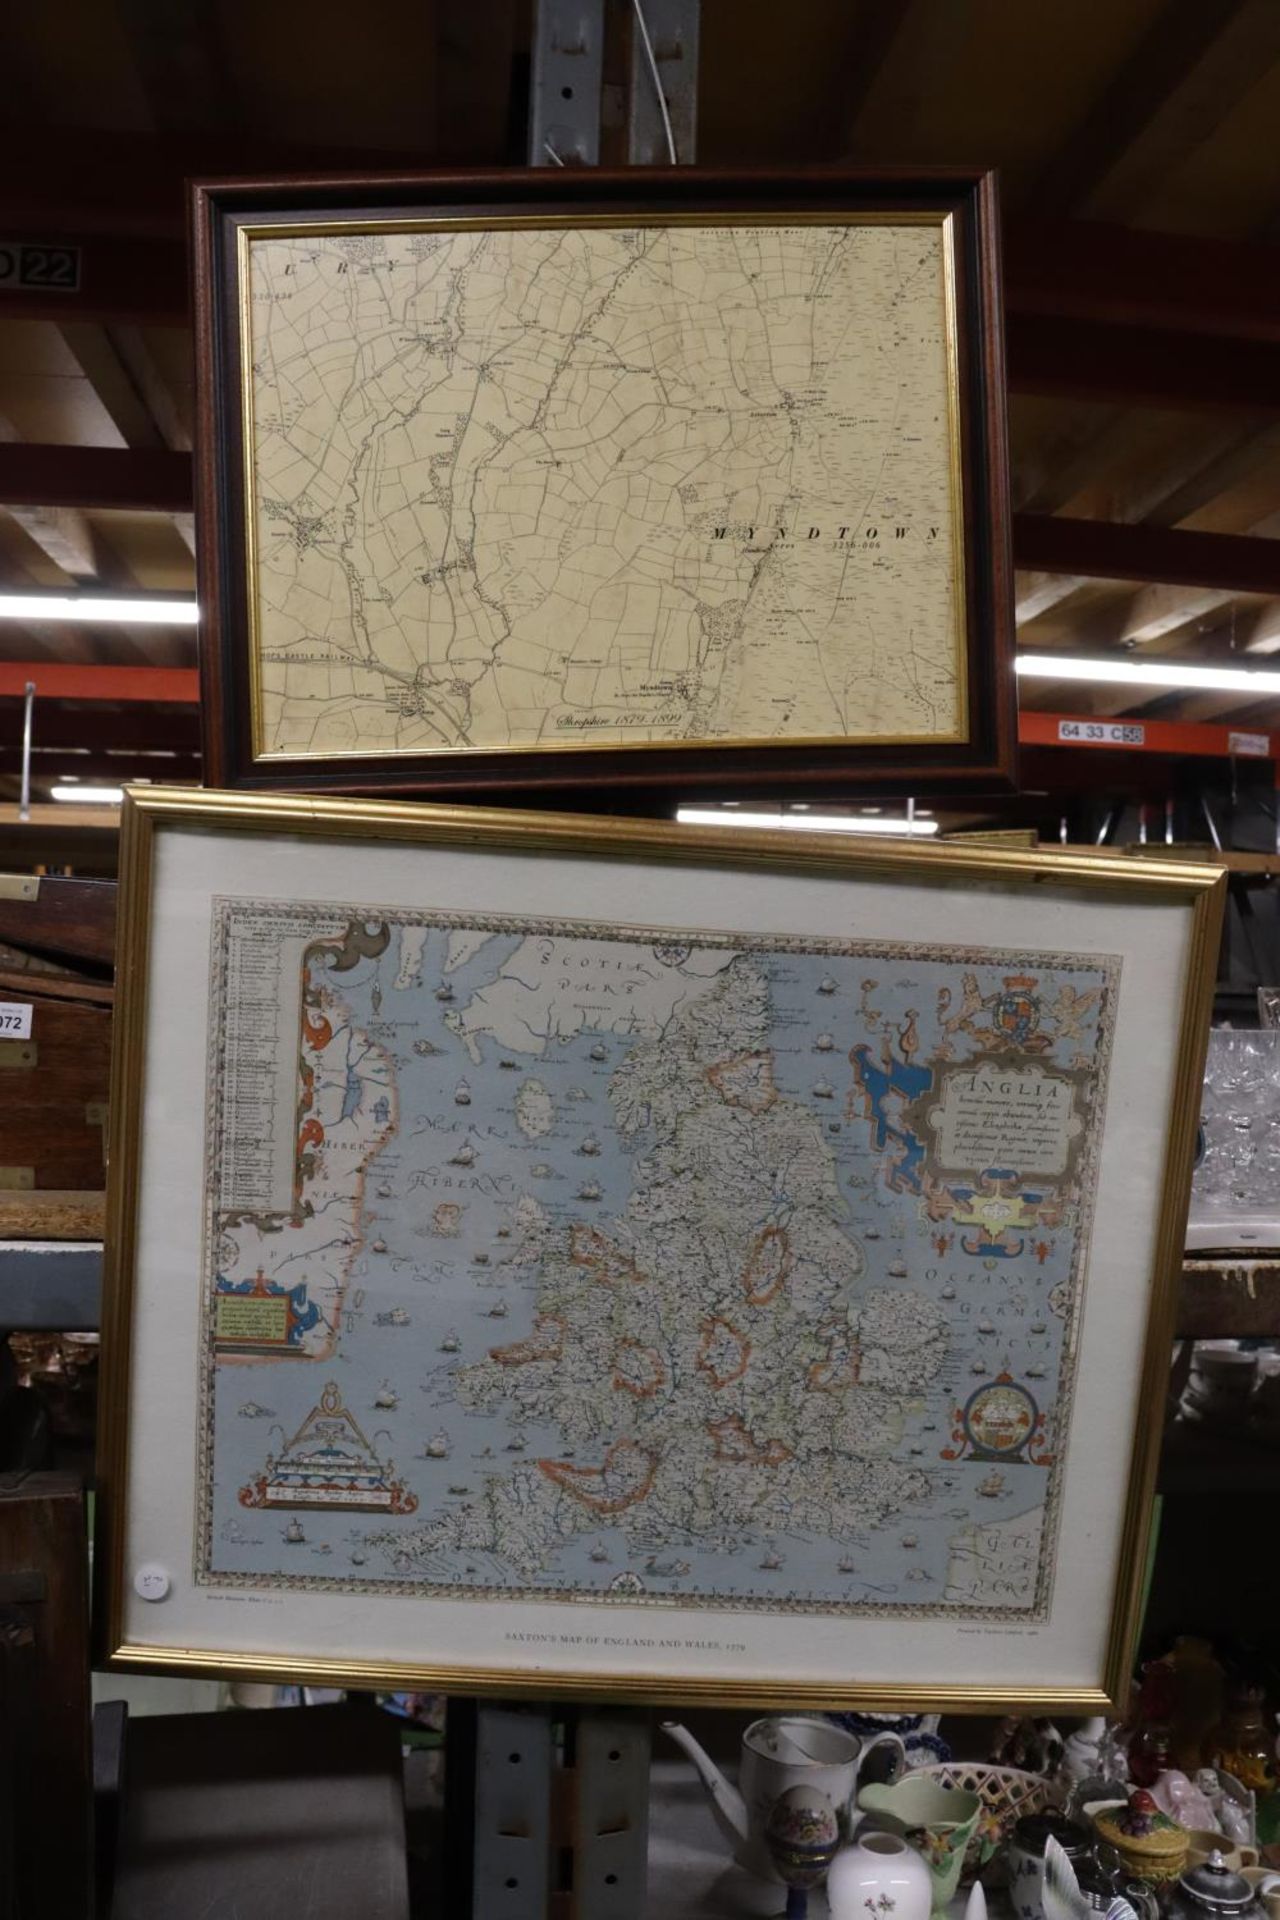 TWO FRAMED MAPS, ONE OF SHROPSHIRE 1879-1899, THE OTHER A PRINT OF SAXTON'S MAP OF ENGLAND AND